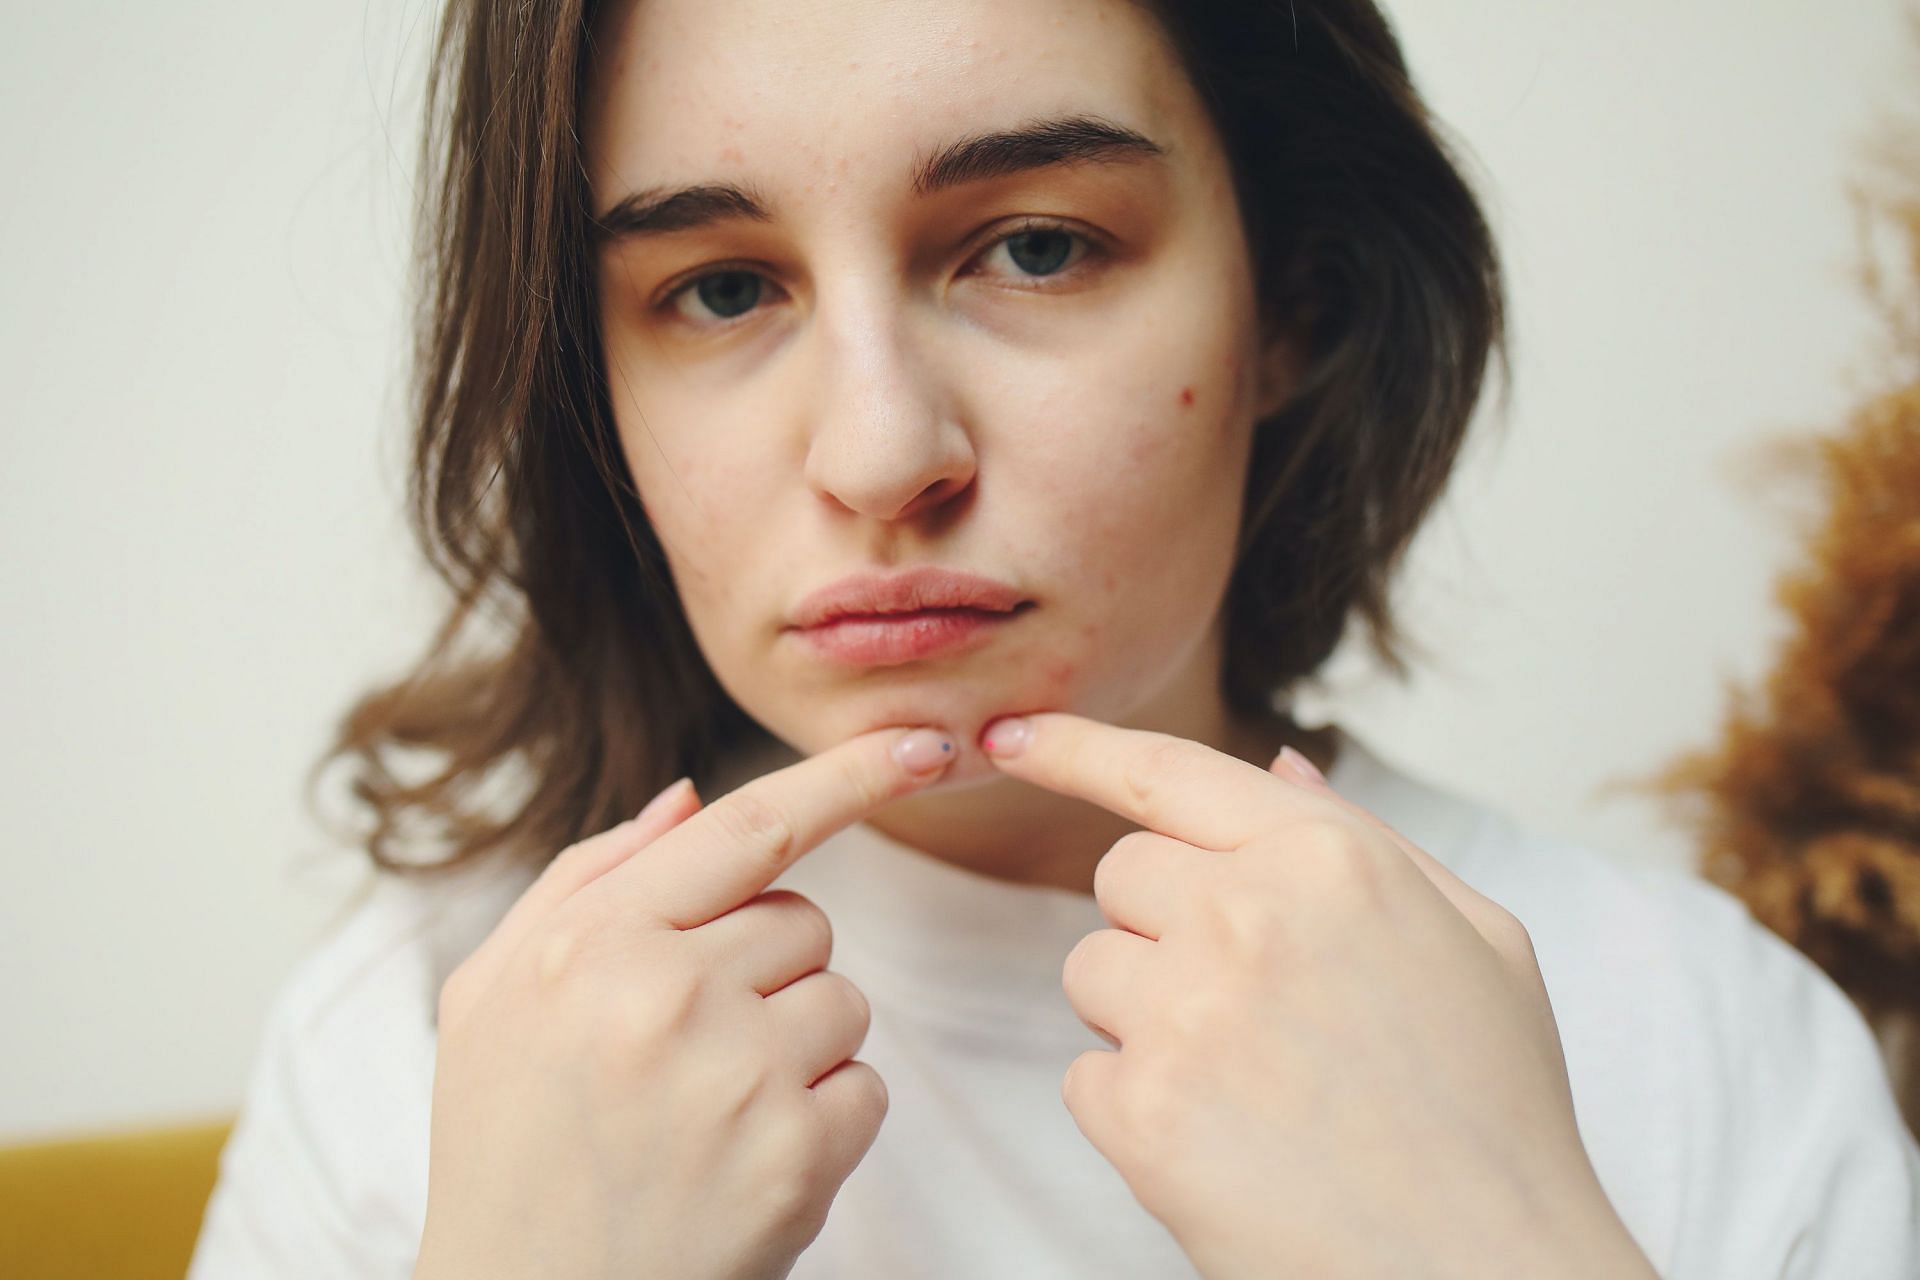 Pimple patches prevent you from picking at your zits. (Image via Pexels/Polina Tankilevitch)